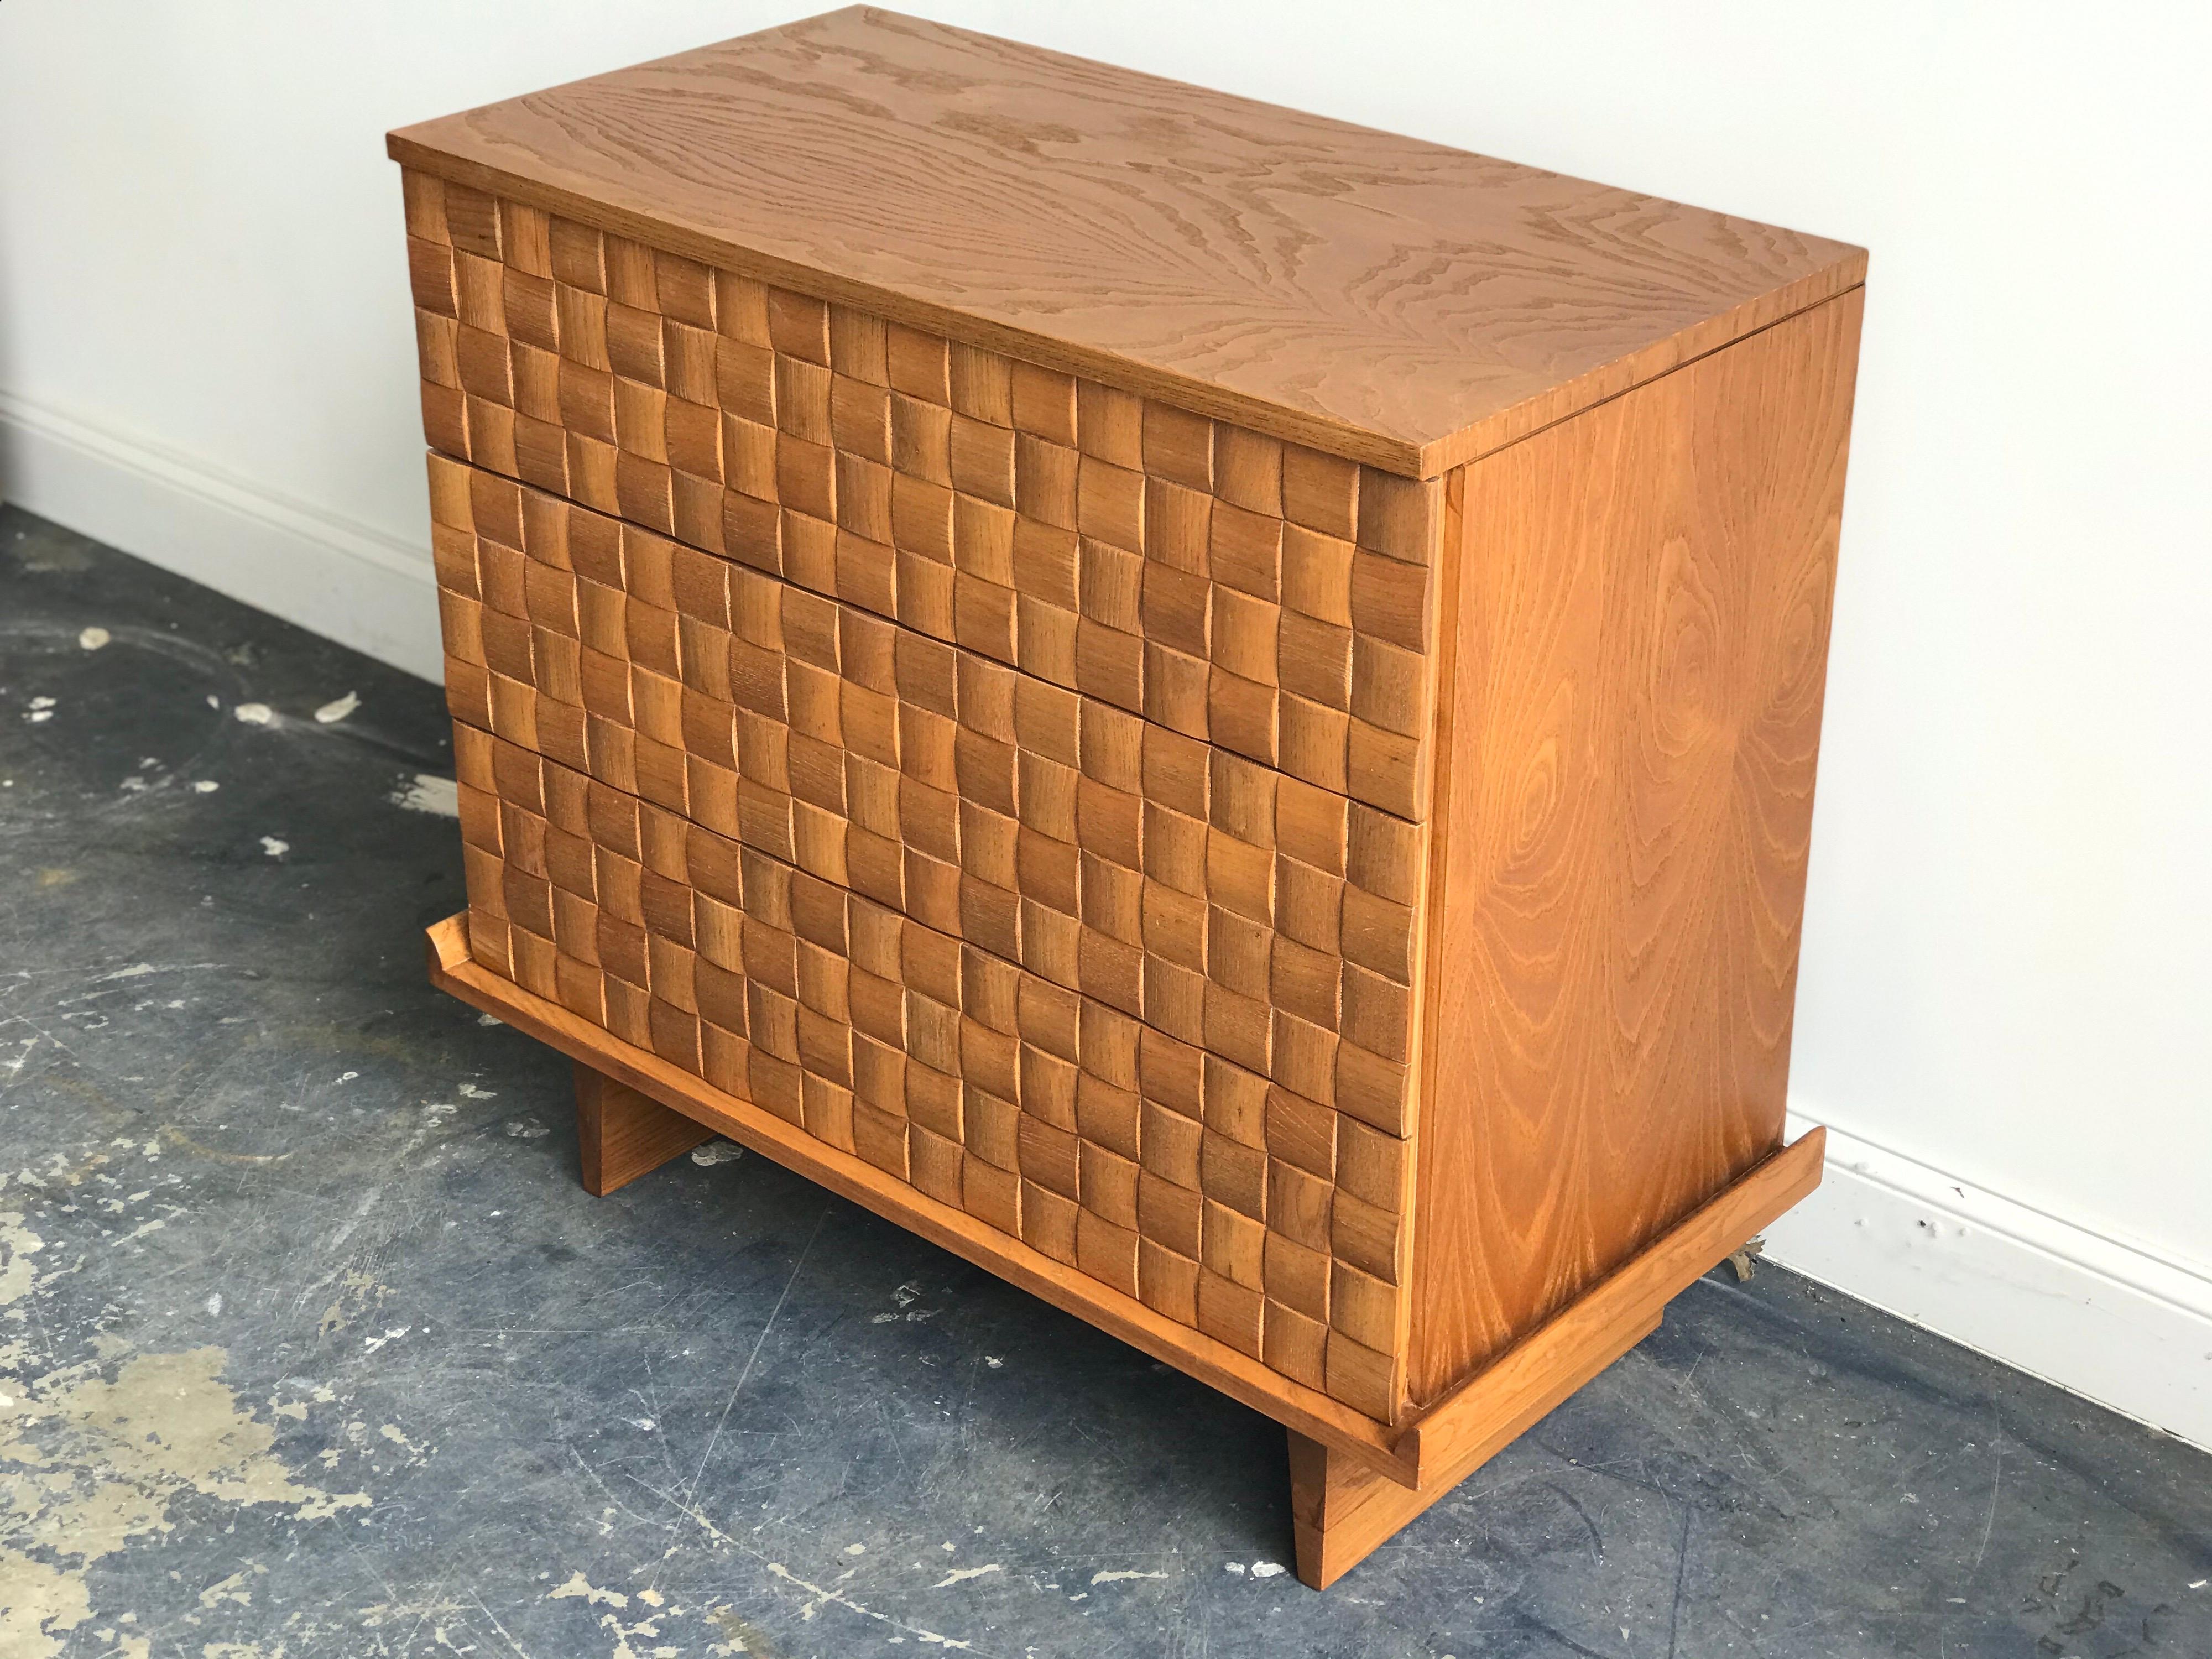 Chest of drawers in oak by Paul Laszlo for Brown Saltman. Wonderful Basketweave design on drawer fronts. Three generous sized drawers. Restored.